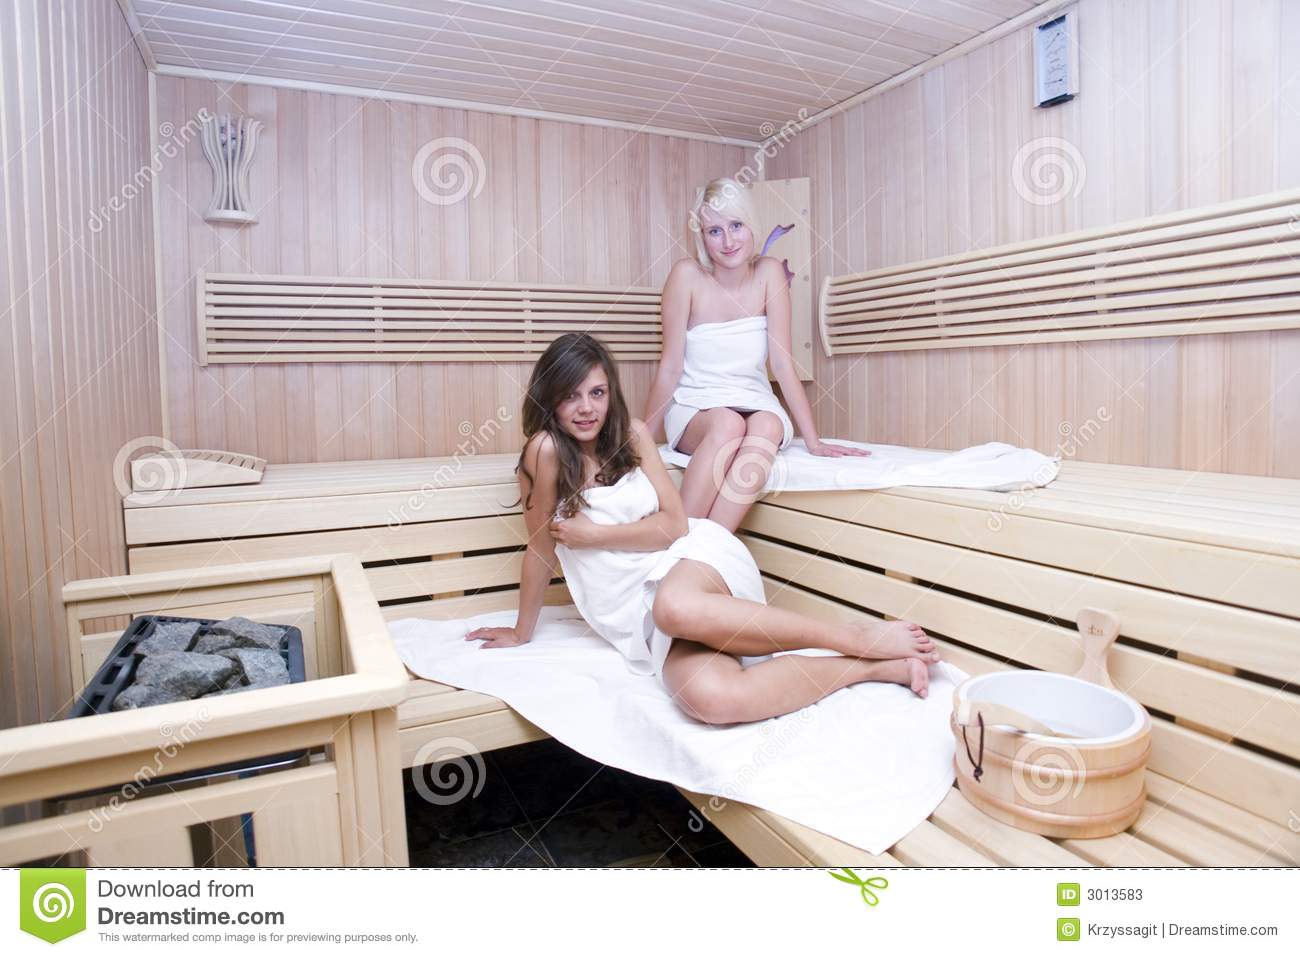 Wrapped In White Towels Relaxing In A Sauna Wooden Steam Room